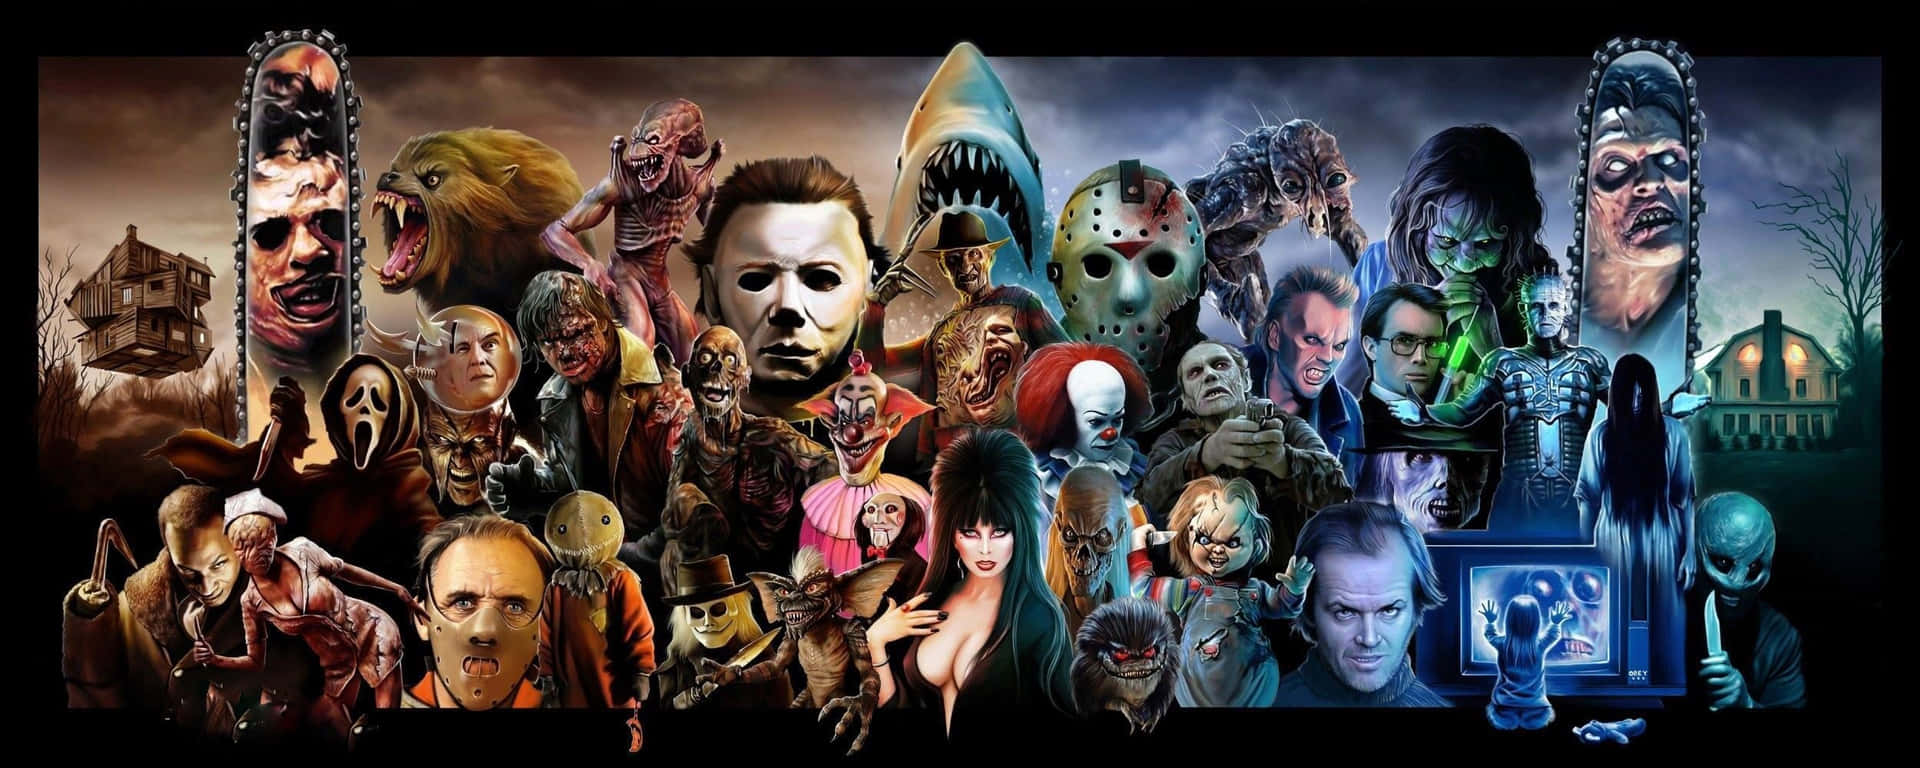 "Don't miss out on thrilling monster movies!" Wallpaper